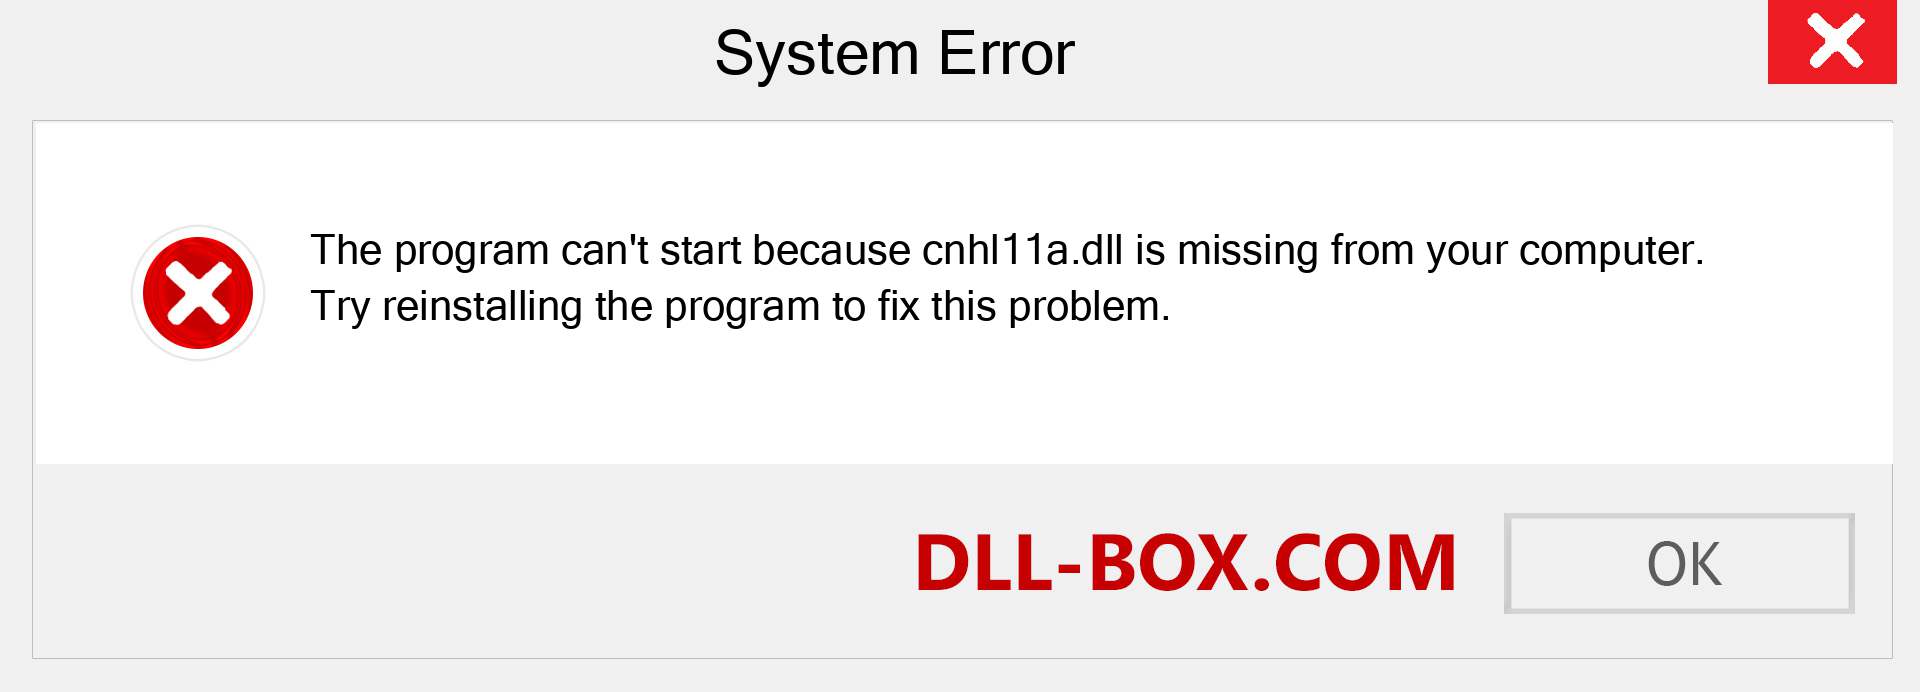  cnhl11a.dll file is missing?. Download for Windows 7, 8, 10 - Fix  cnhl11a dll Missing Error on Windows, photos, images